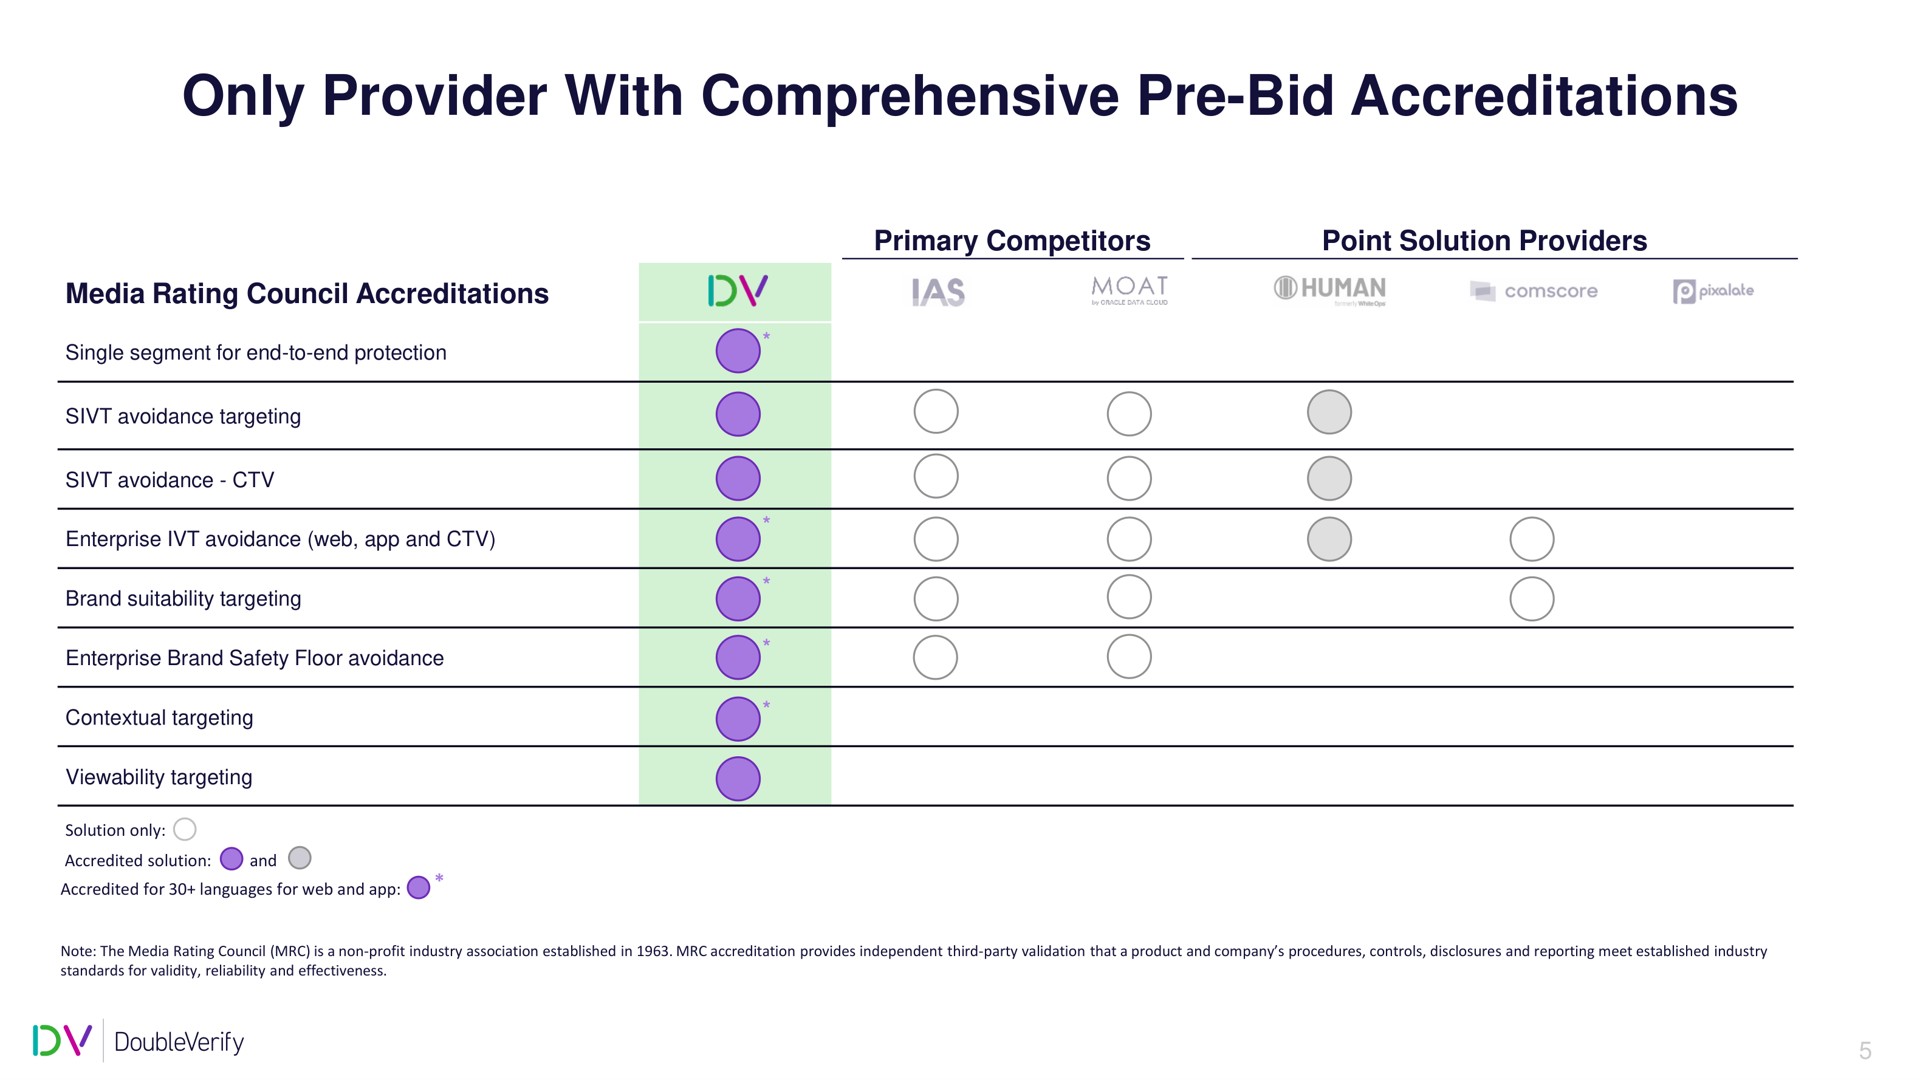 only provider with comprehensive bid accreditations | DoubleVerify